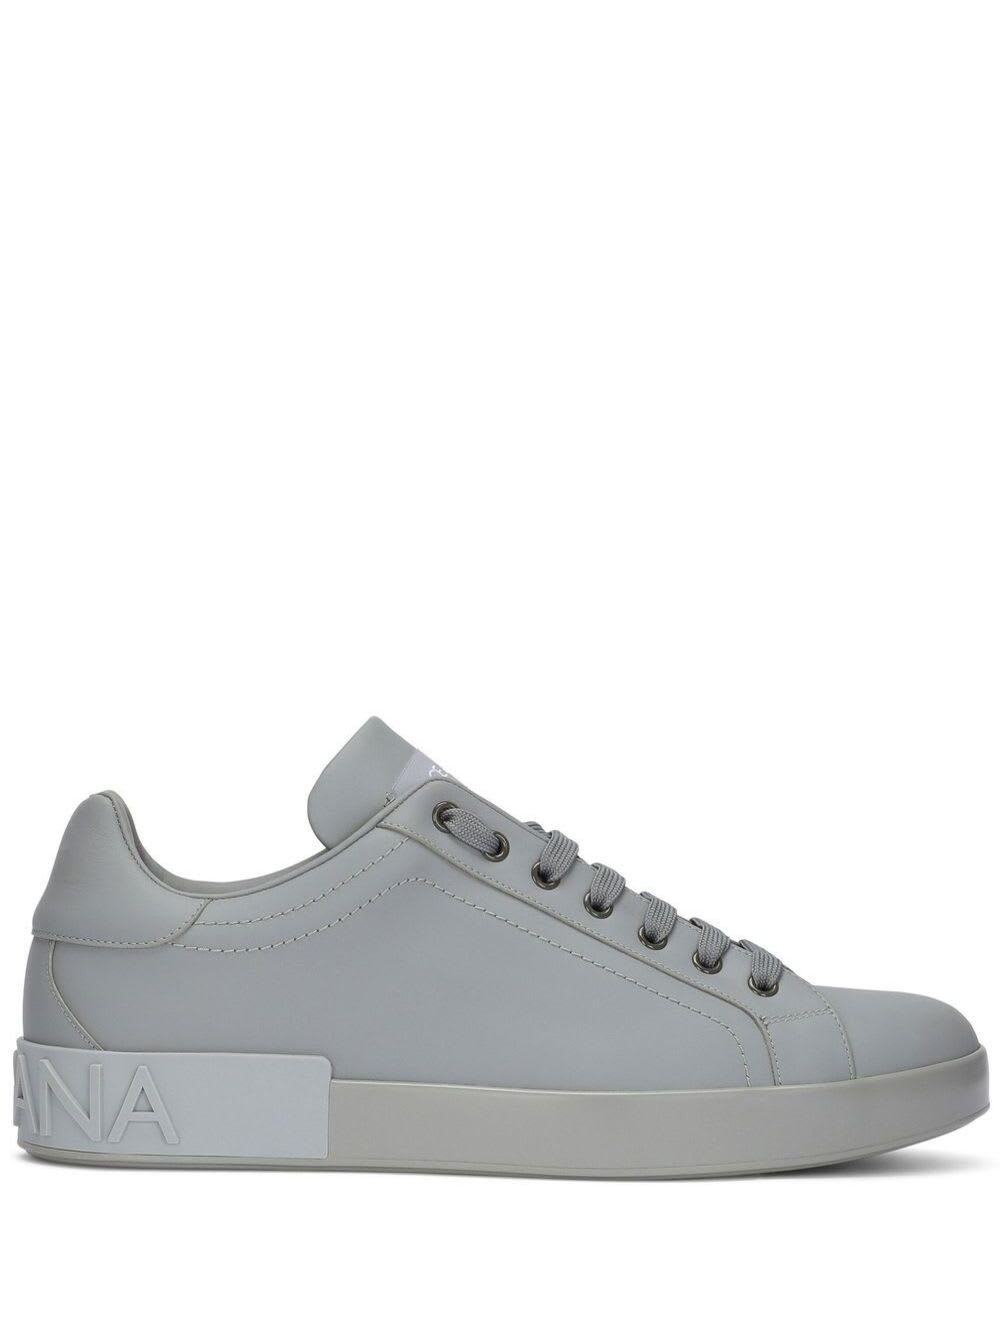 DOLCE & GABBANA PORTOFINO NEW GREY LOW-TOP SNEAKERS WITH CONTRASTING LOGO IN LEATHER MAN